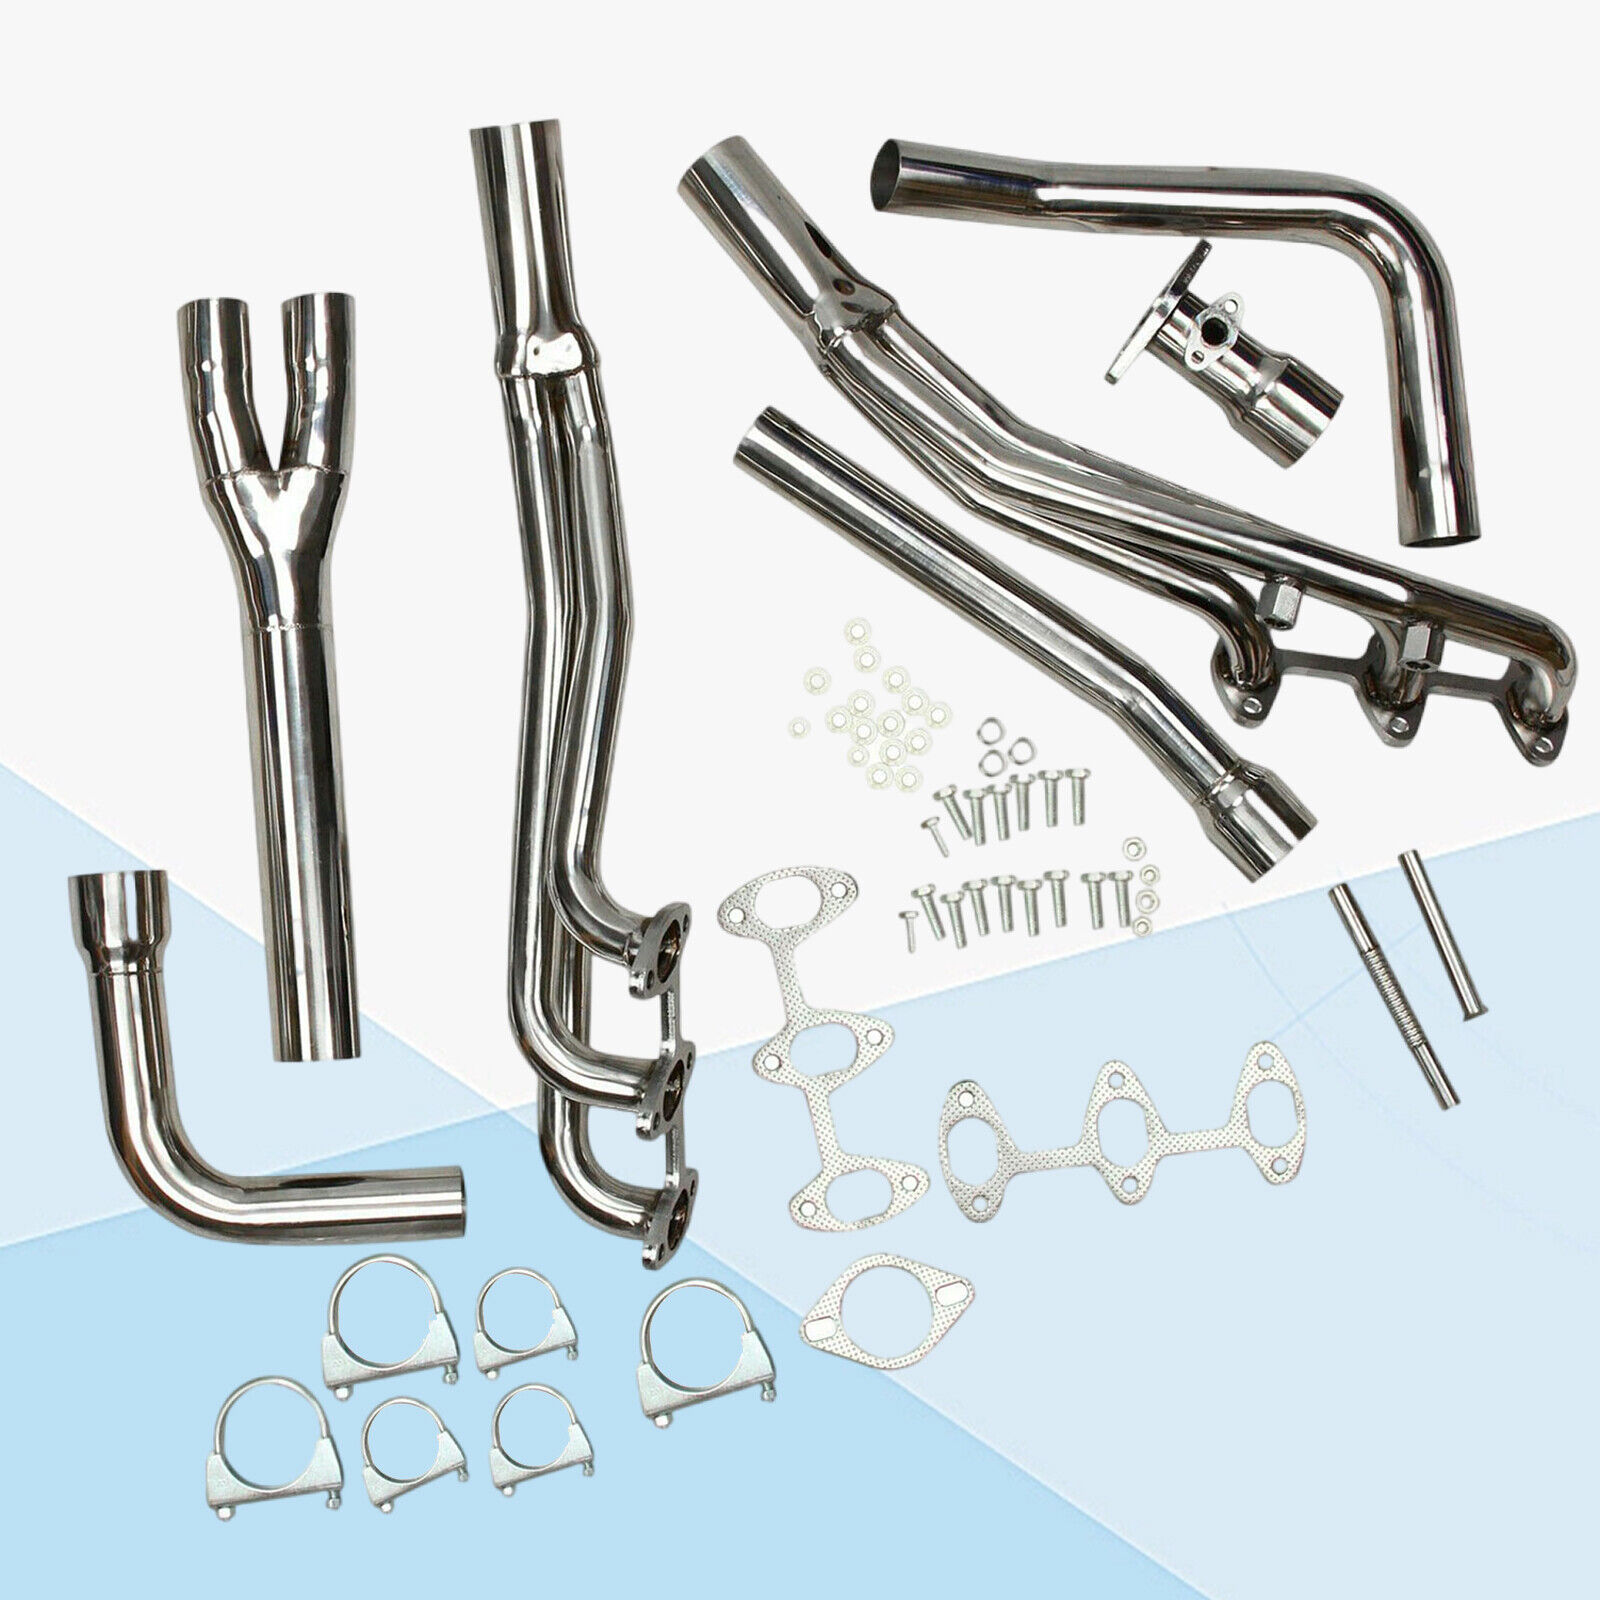 New Stainless Steel Manifold Headers For Toyota 4Runner Pickup 1988-1995 3.0 VY7